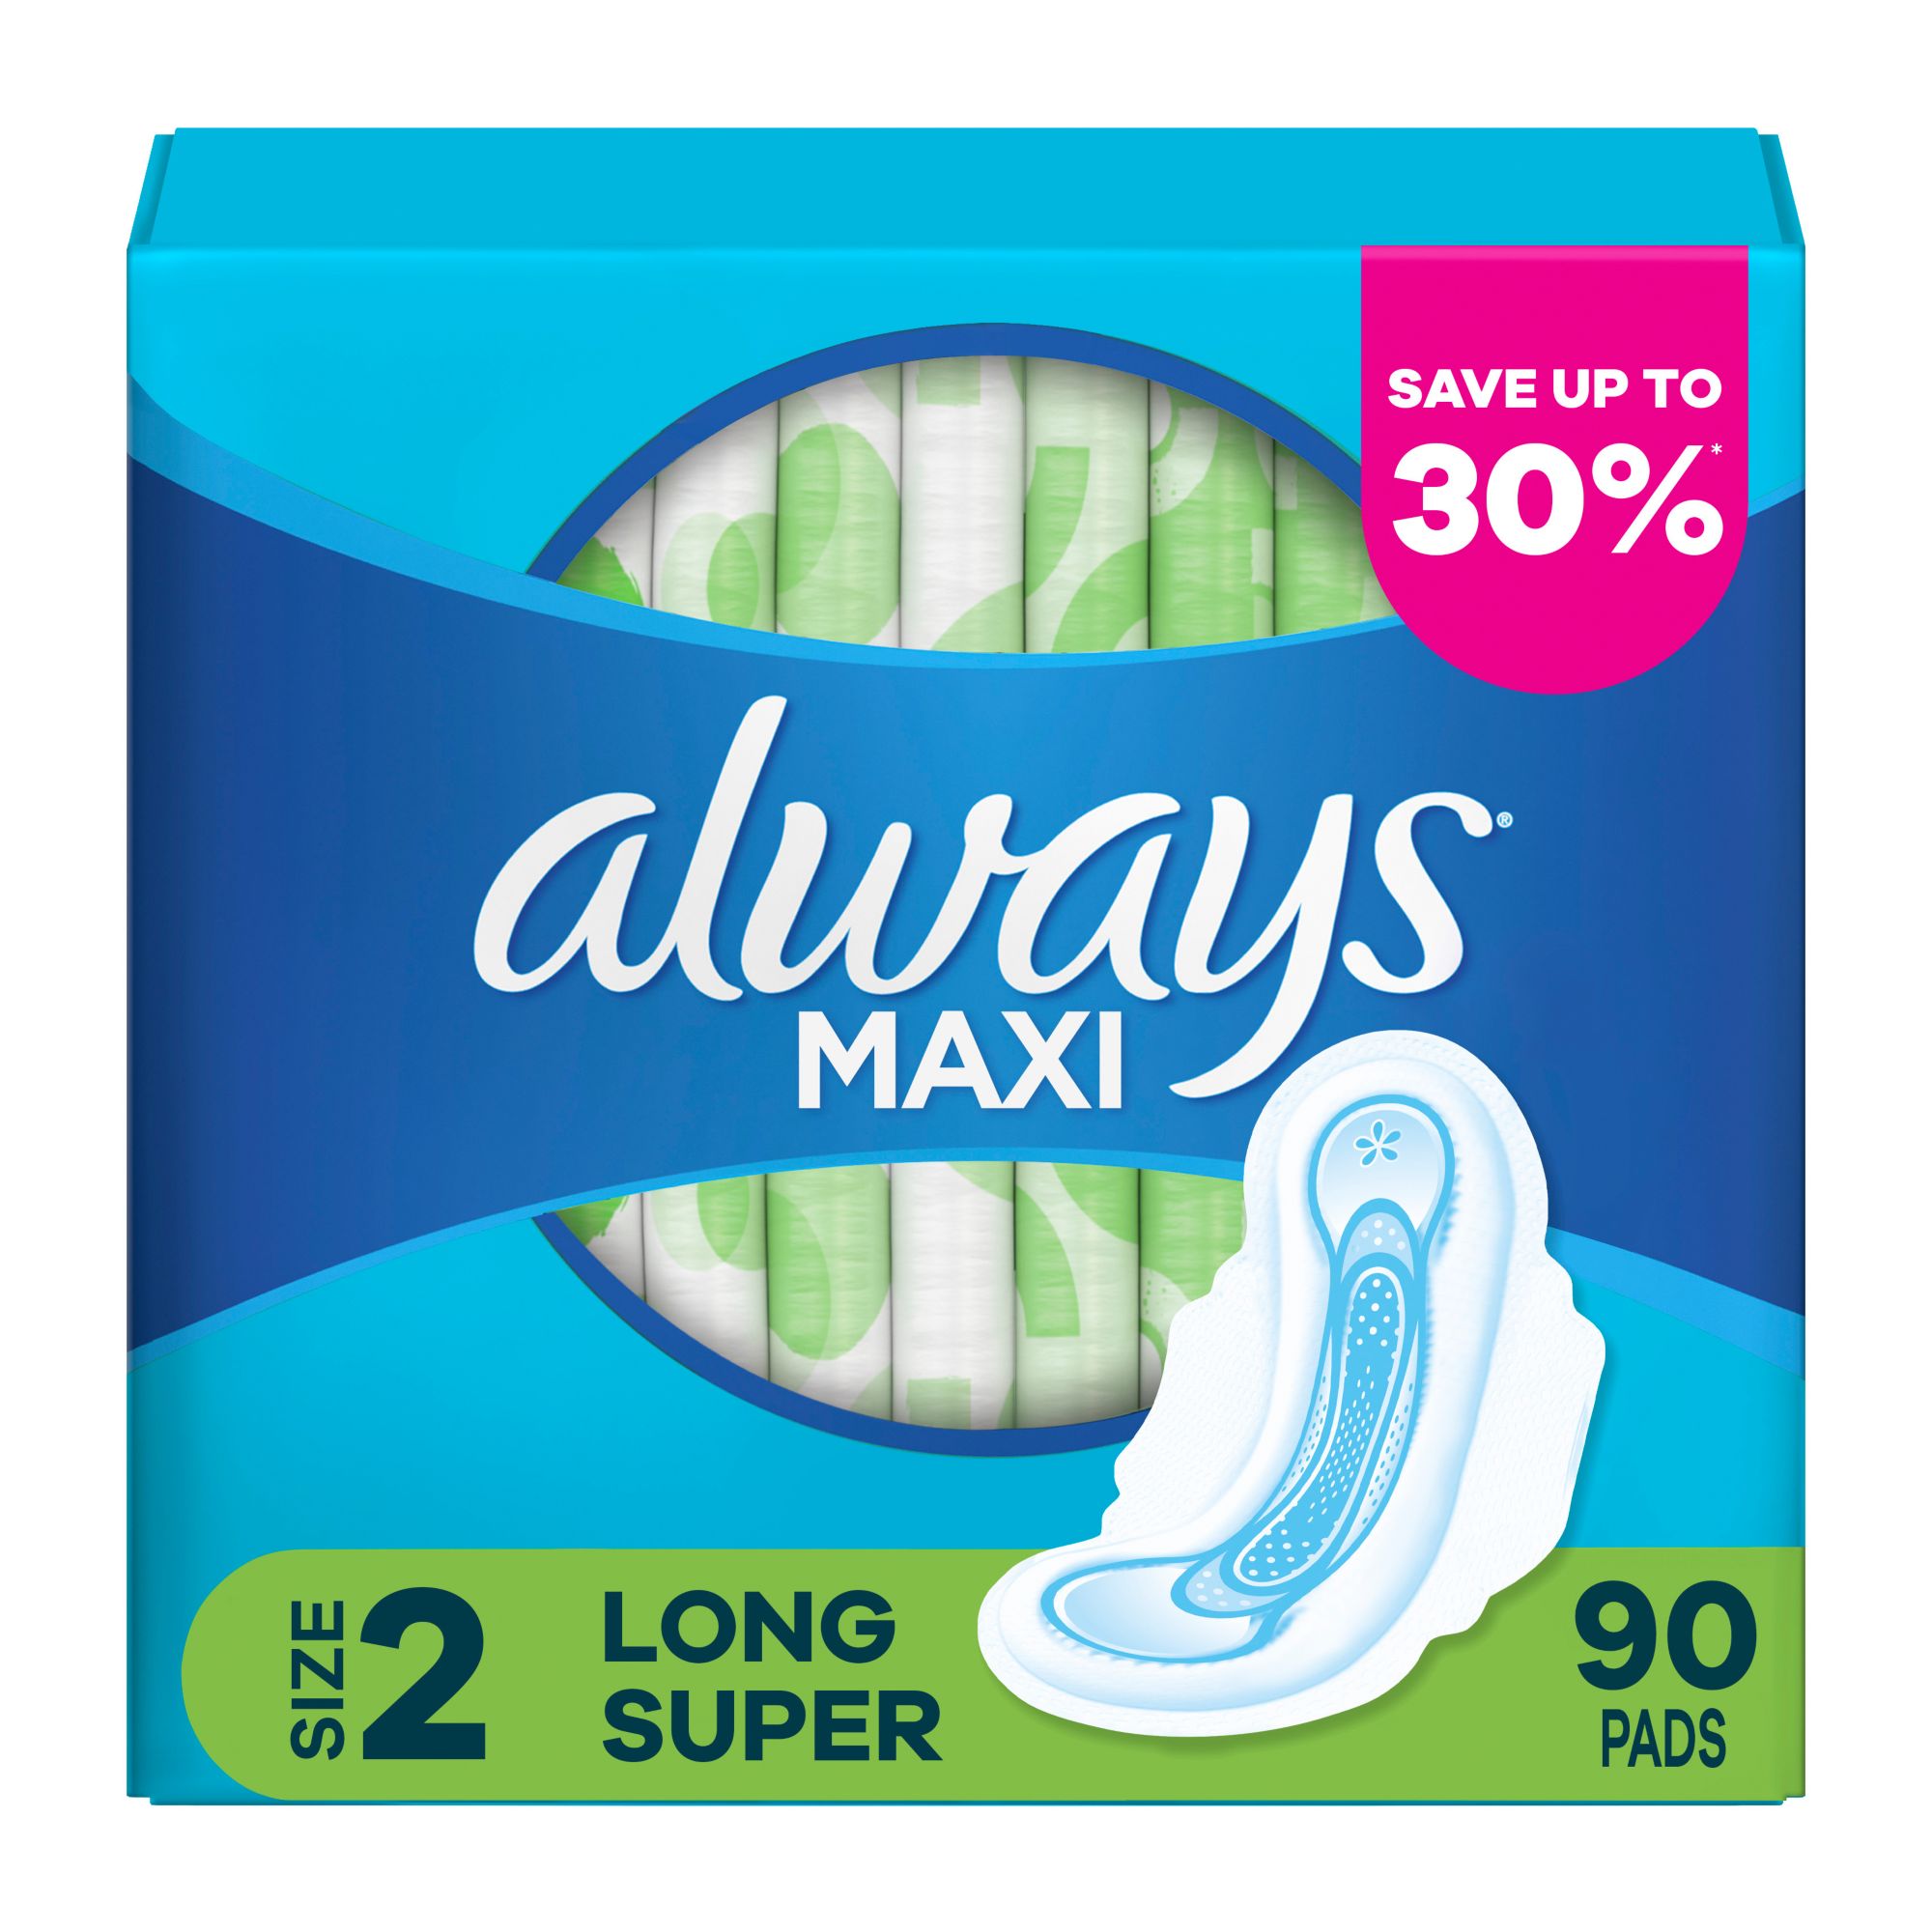 Always Long and Super Maxi Pads with Flexi-Wings Multipack, 90 ct.